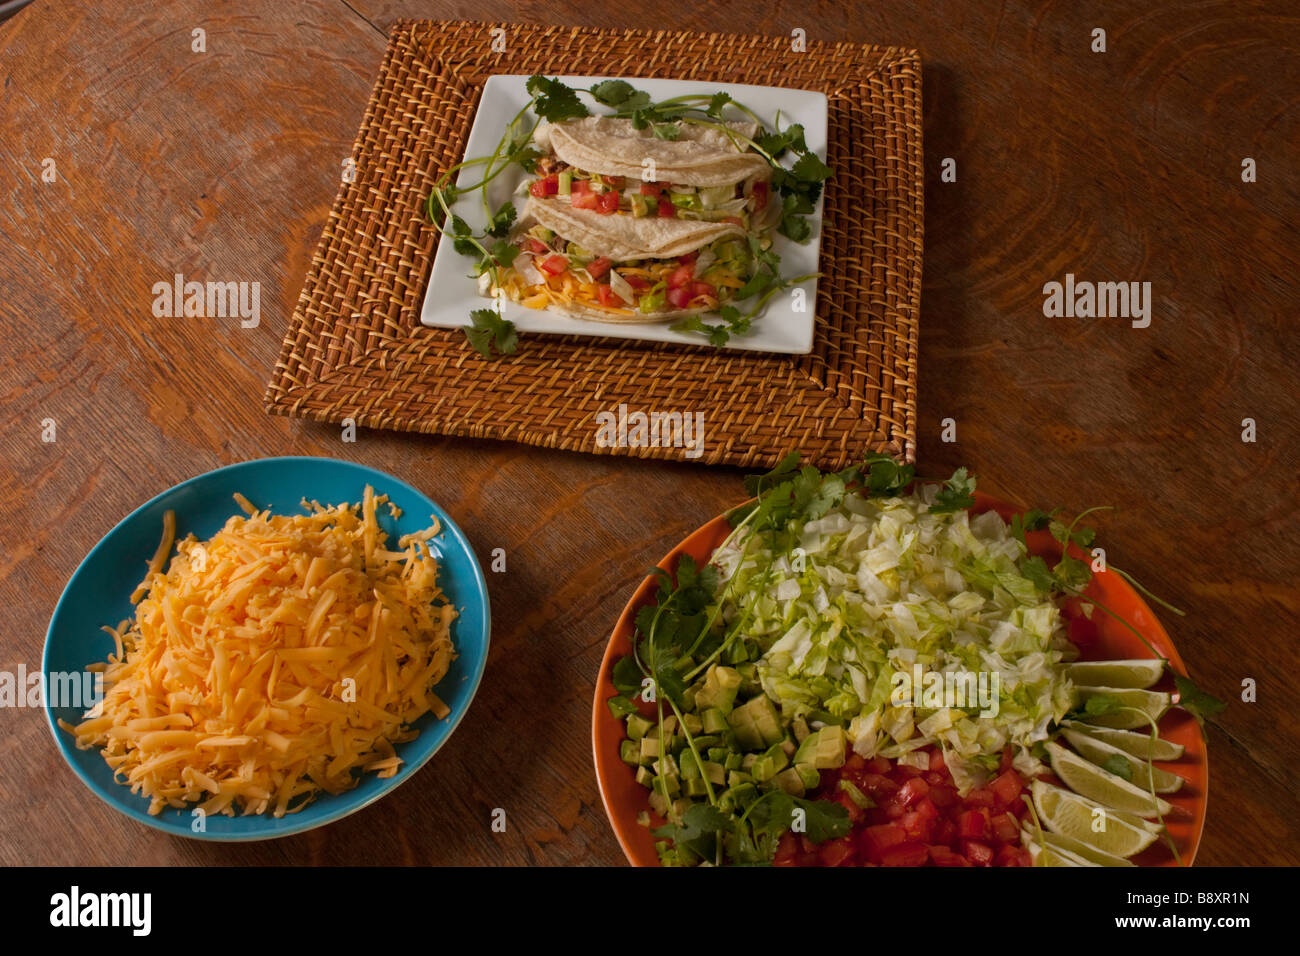 A plate of traditional style soft tacos on a bamboo charger garnished with cilantro Stock Photo